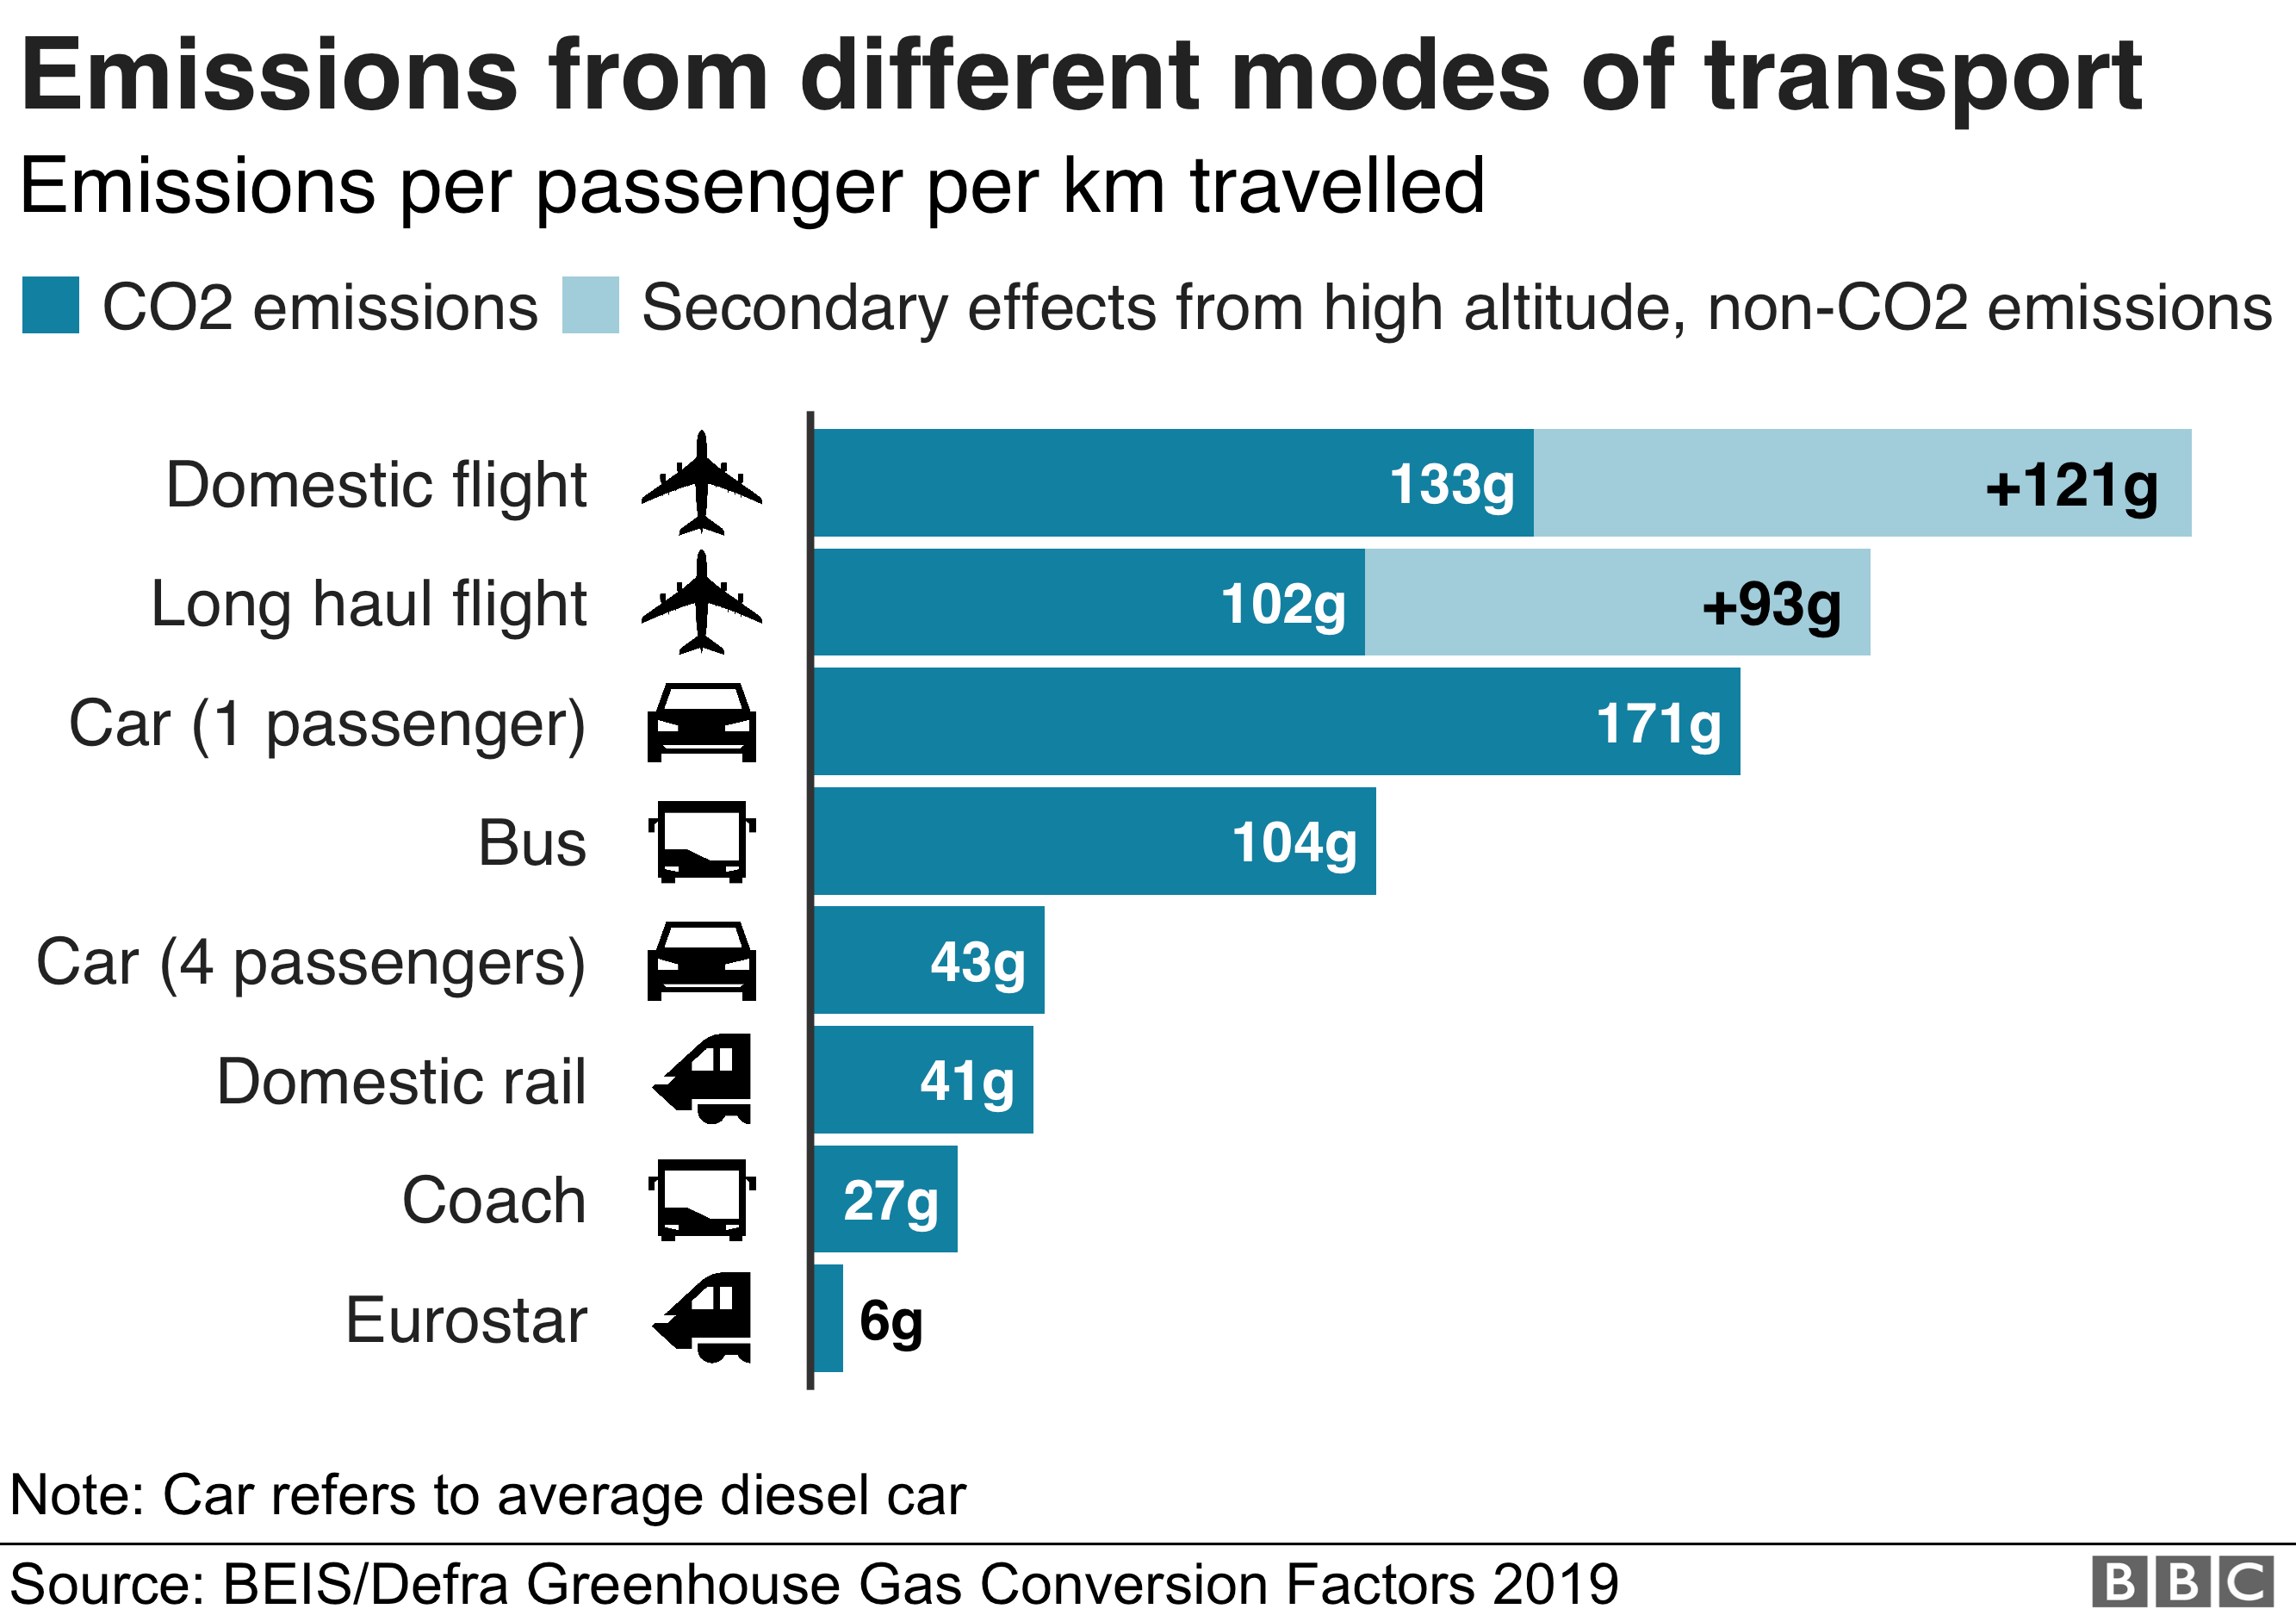 Chart showing emissions from different modes of transport